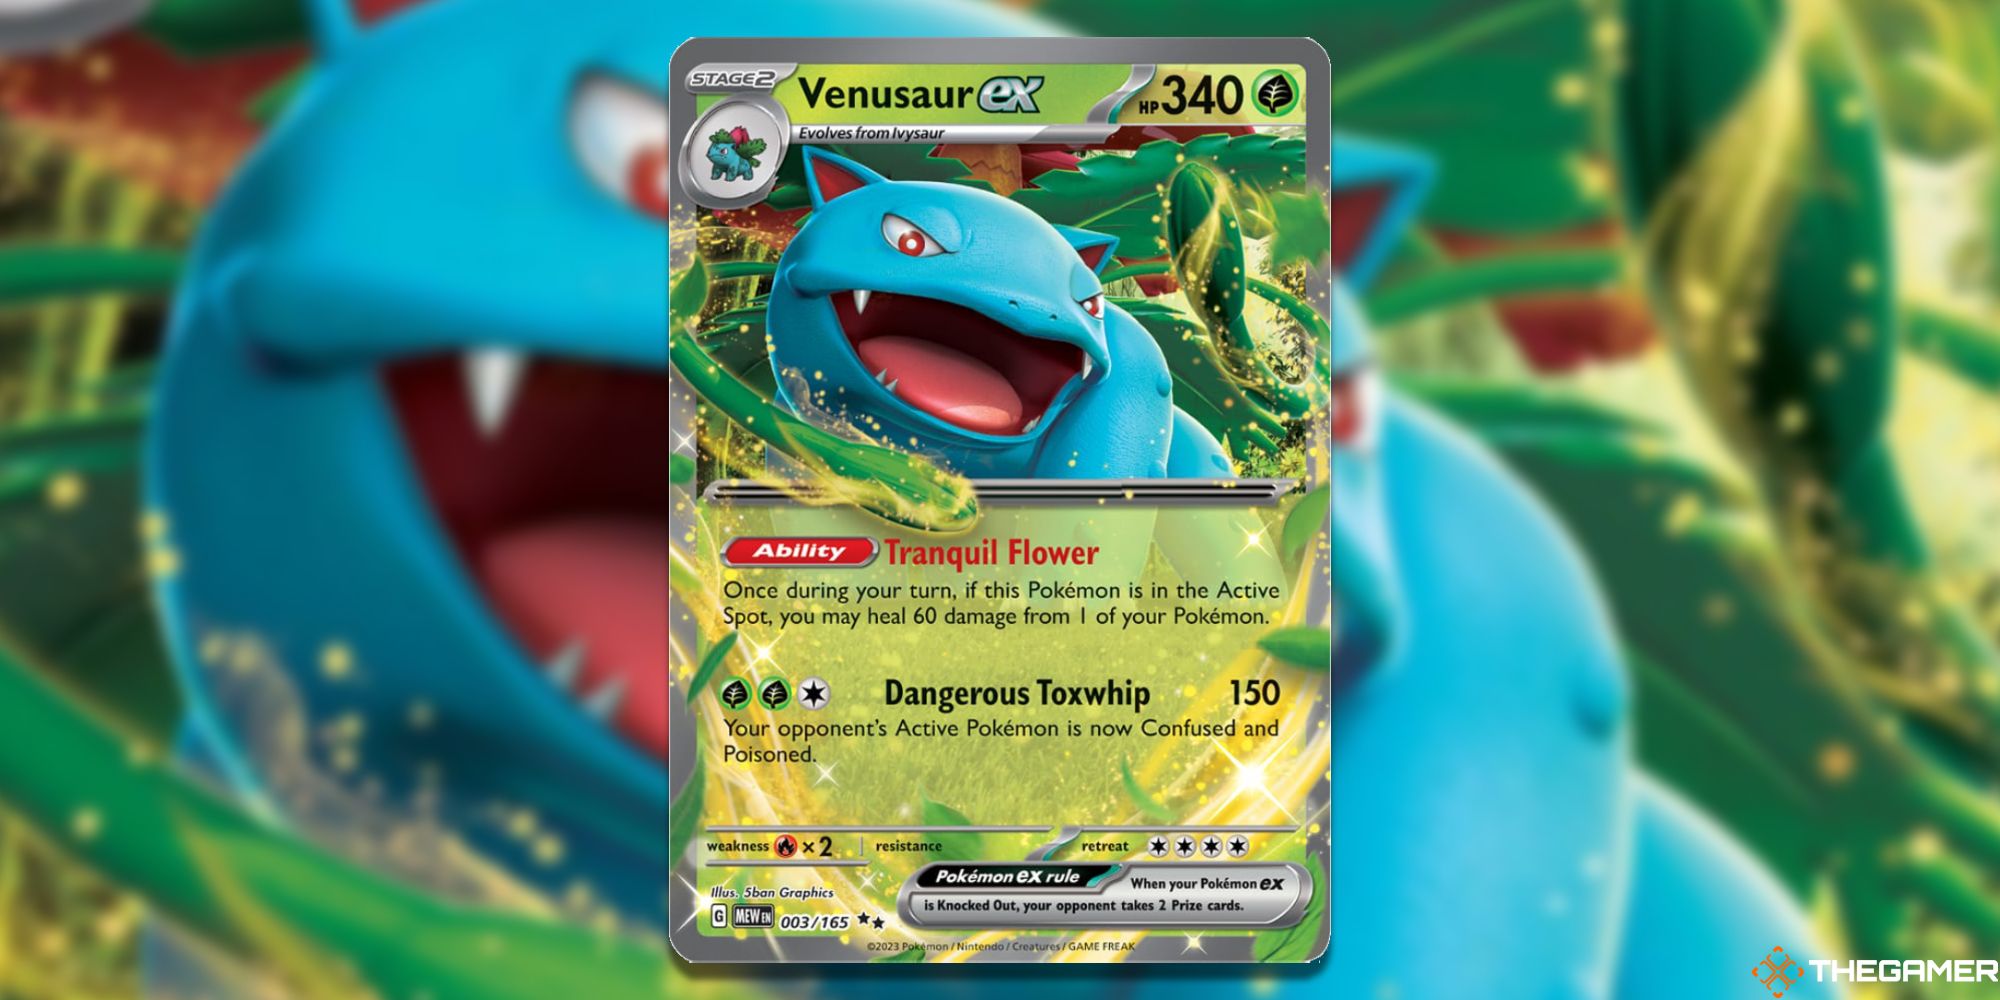 Image of the Venusaur ex card in Magic: The Gathering, with art by 5ban Graphics